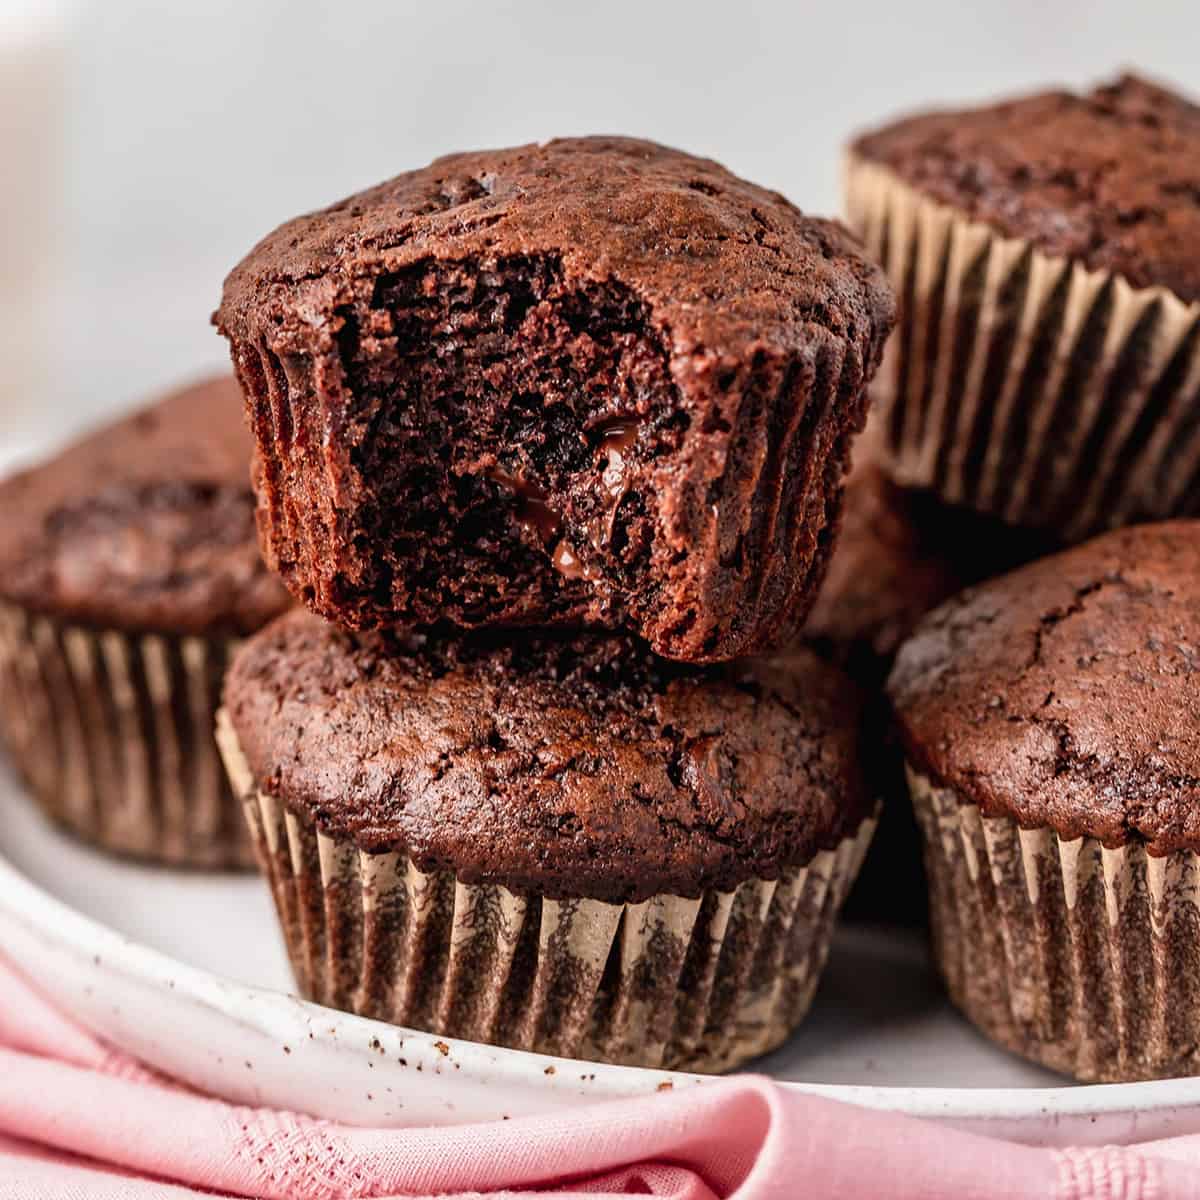 a plate of chocolate muffins, one has a bite taken out of it